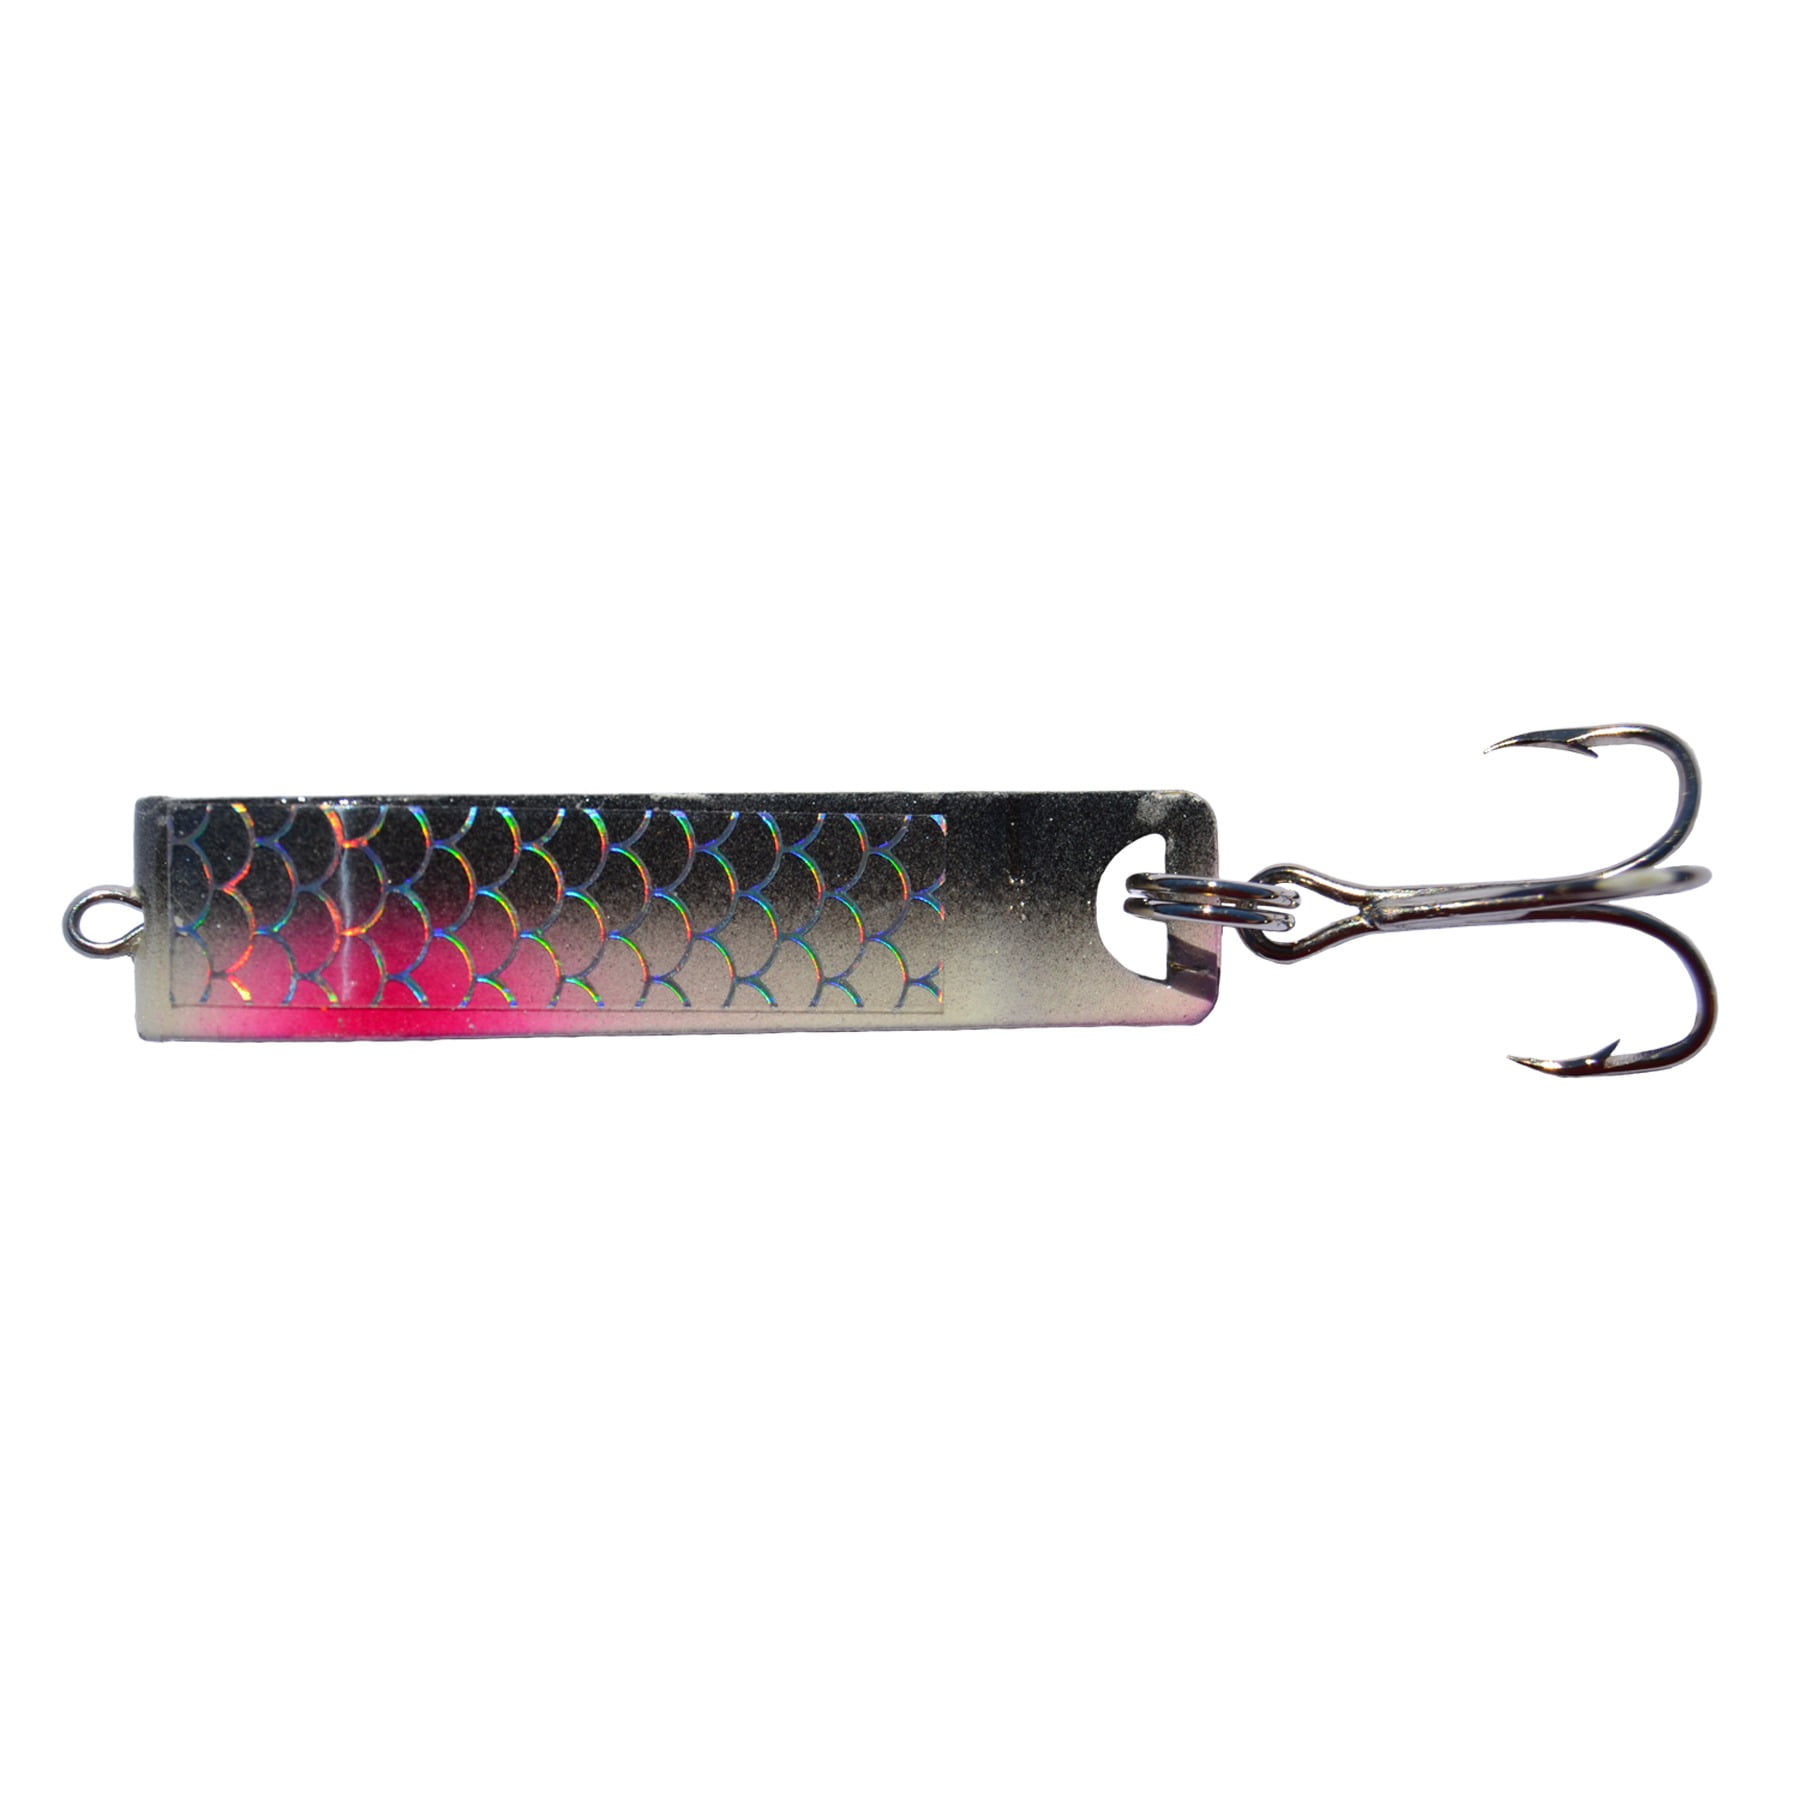 Mack's Lure Cripplure Sonic Spoon Freshwater Trout Fishing Lure